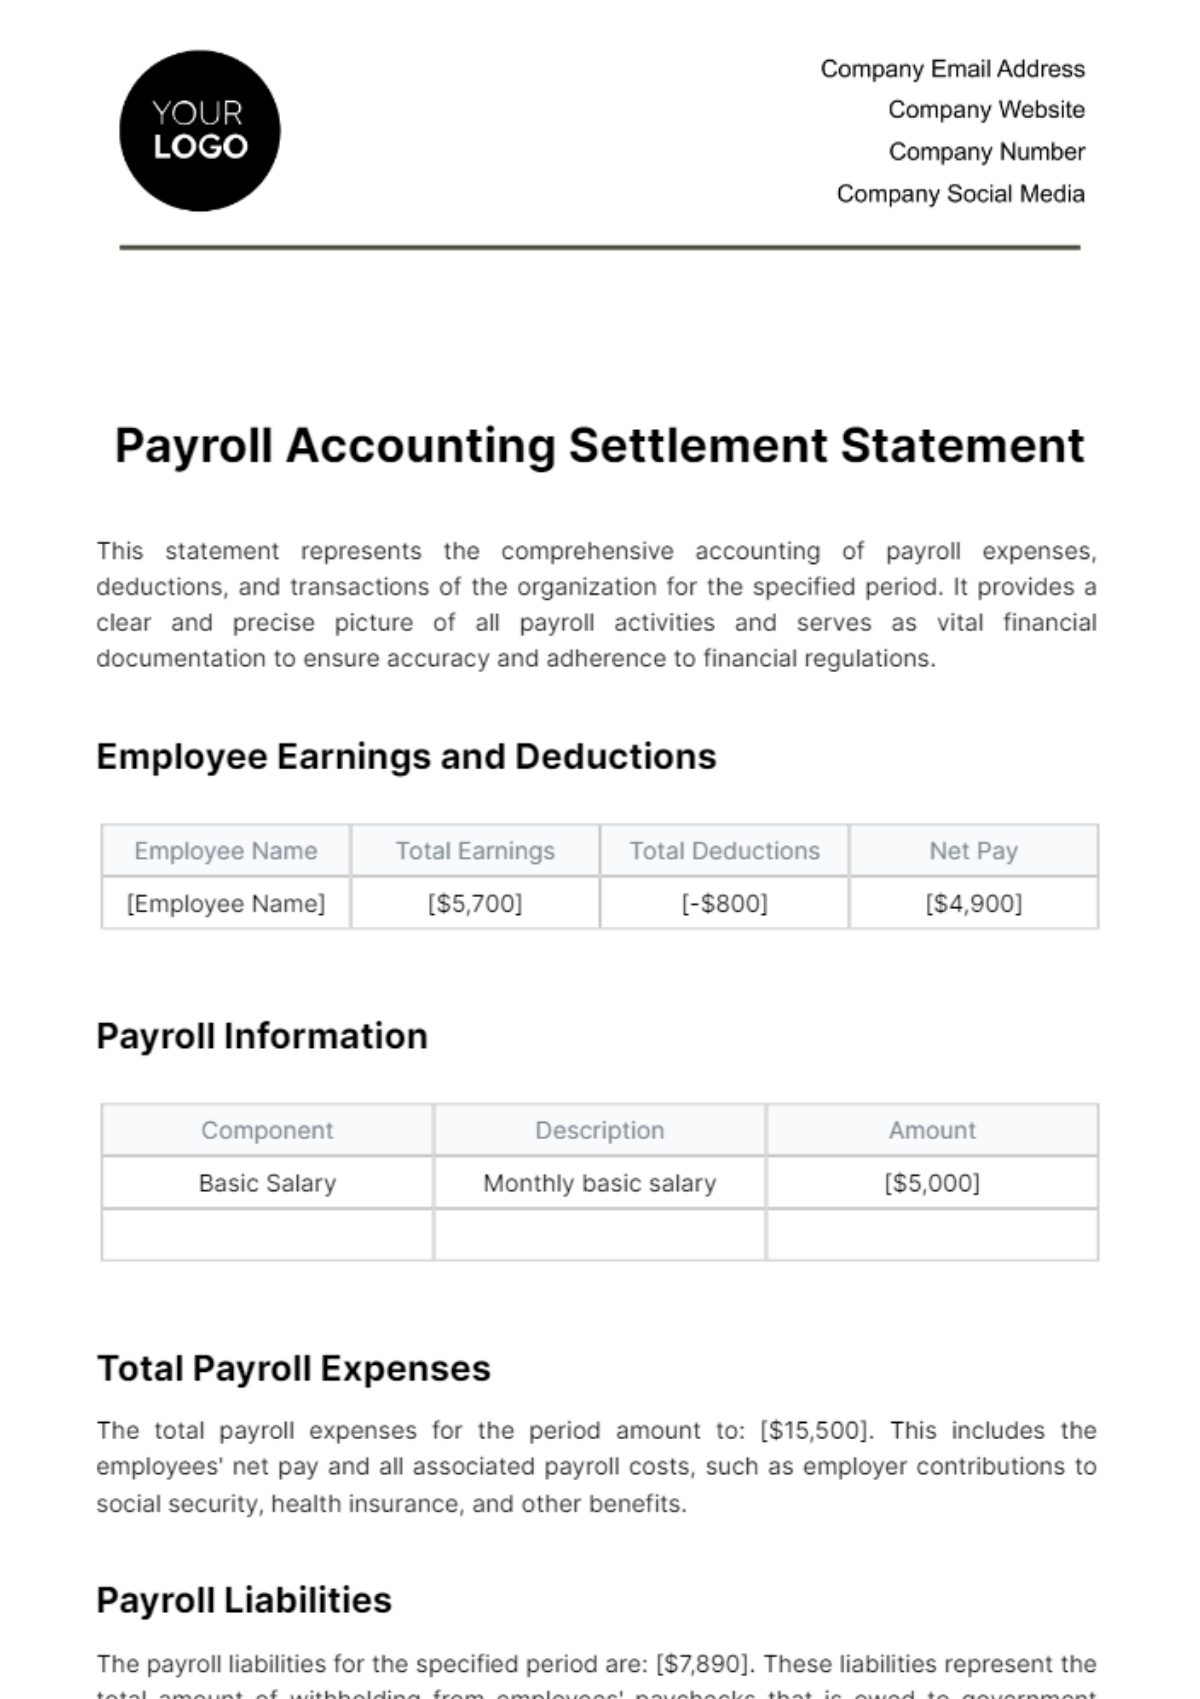 Free Payroll Accounting Settlement Statement Template